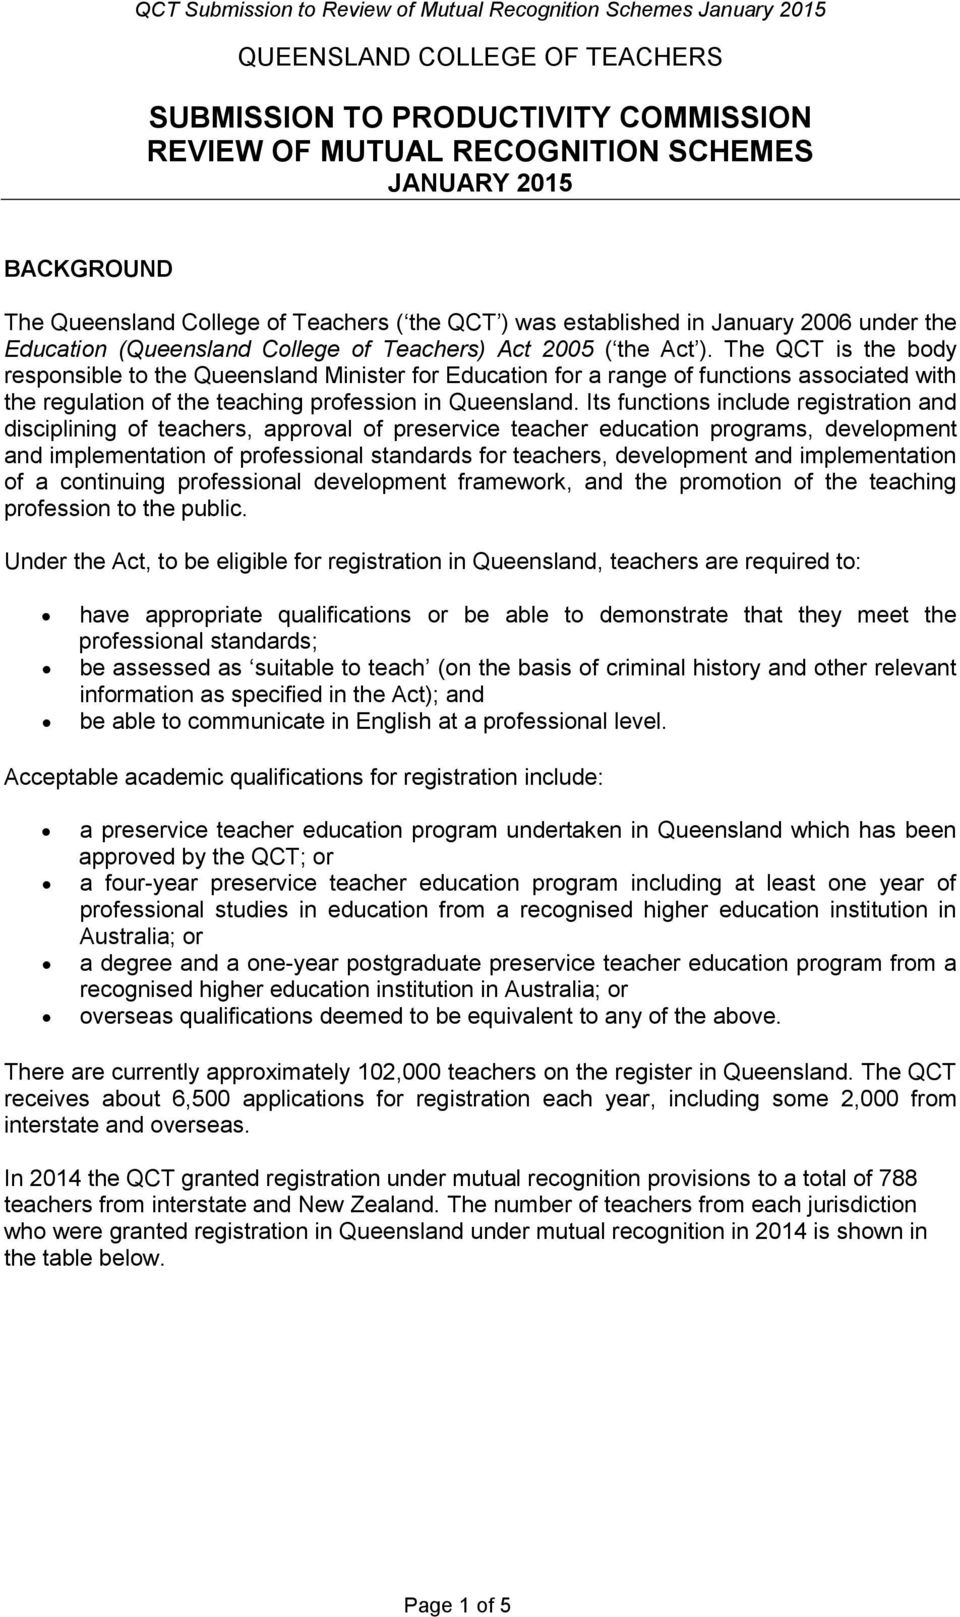 The QCT is the body responsible to the Queensland Minister for Education for a range of functions associated with the regulation of the teaching profession in Queensland.